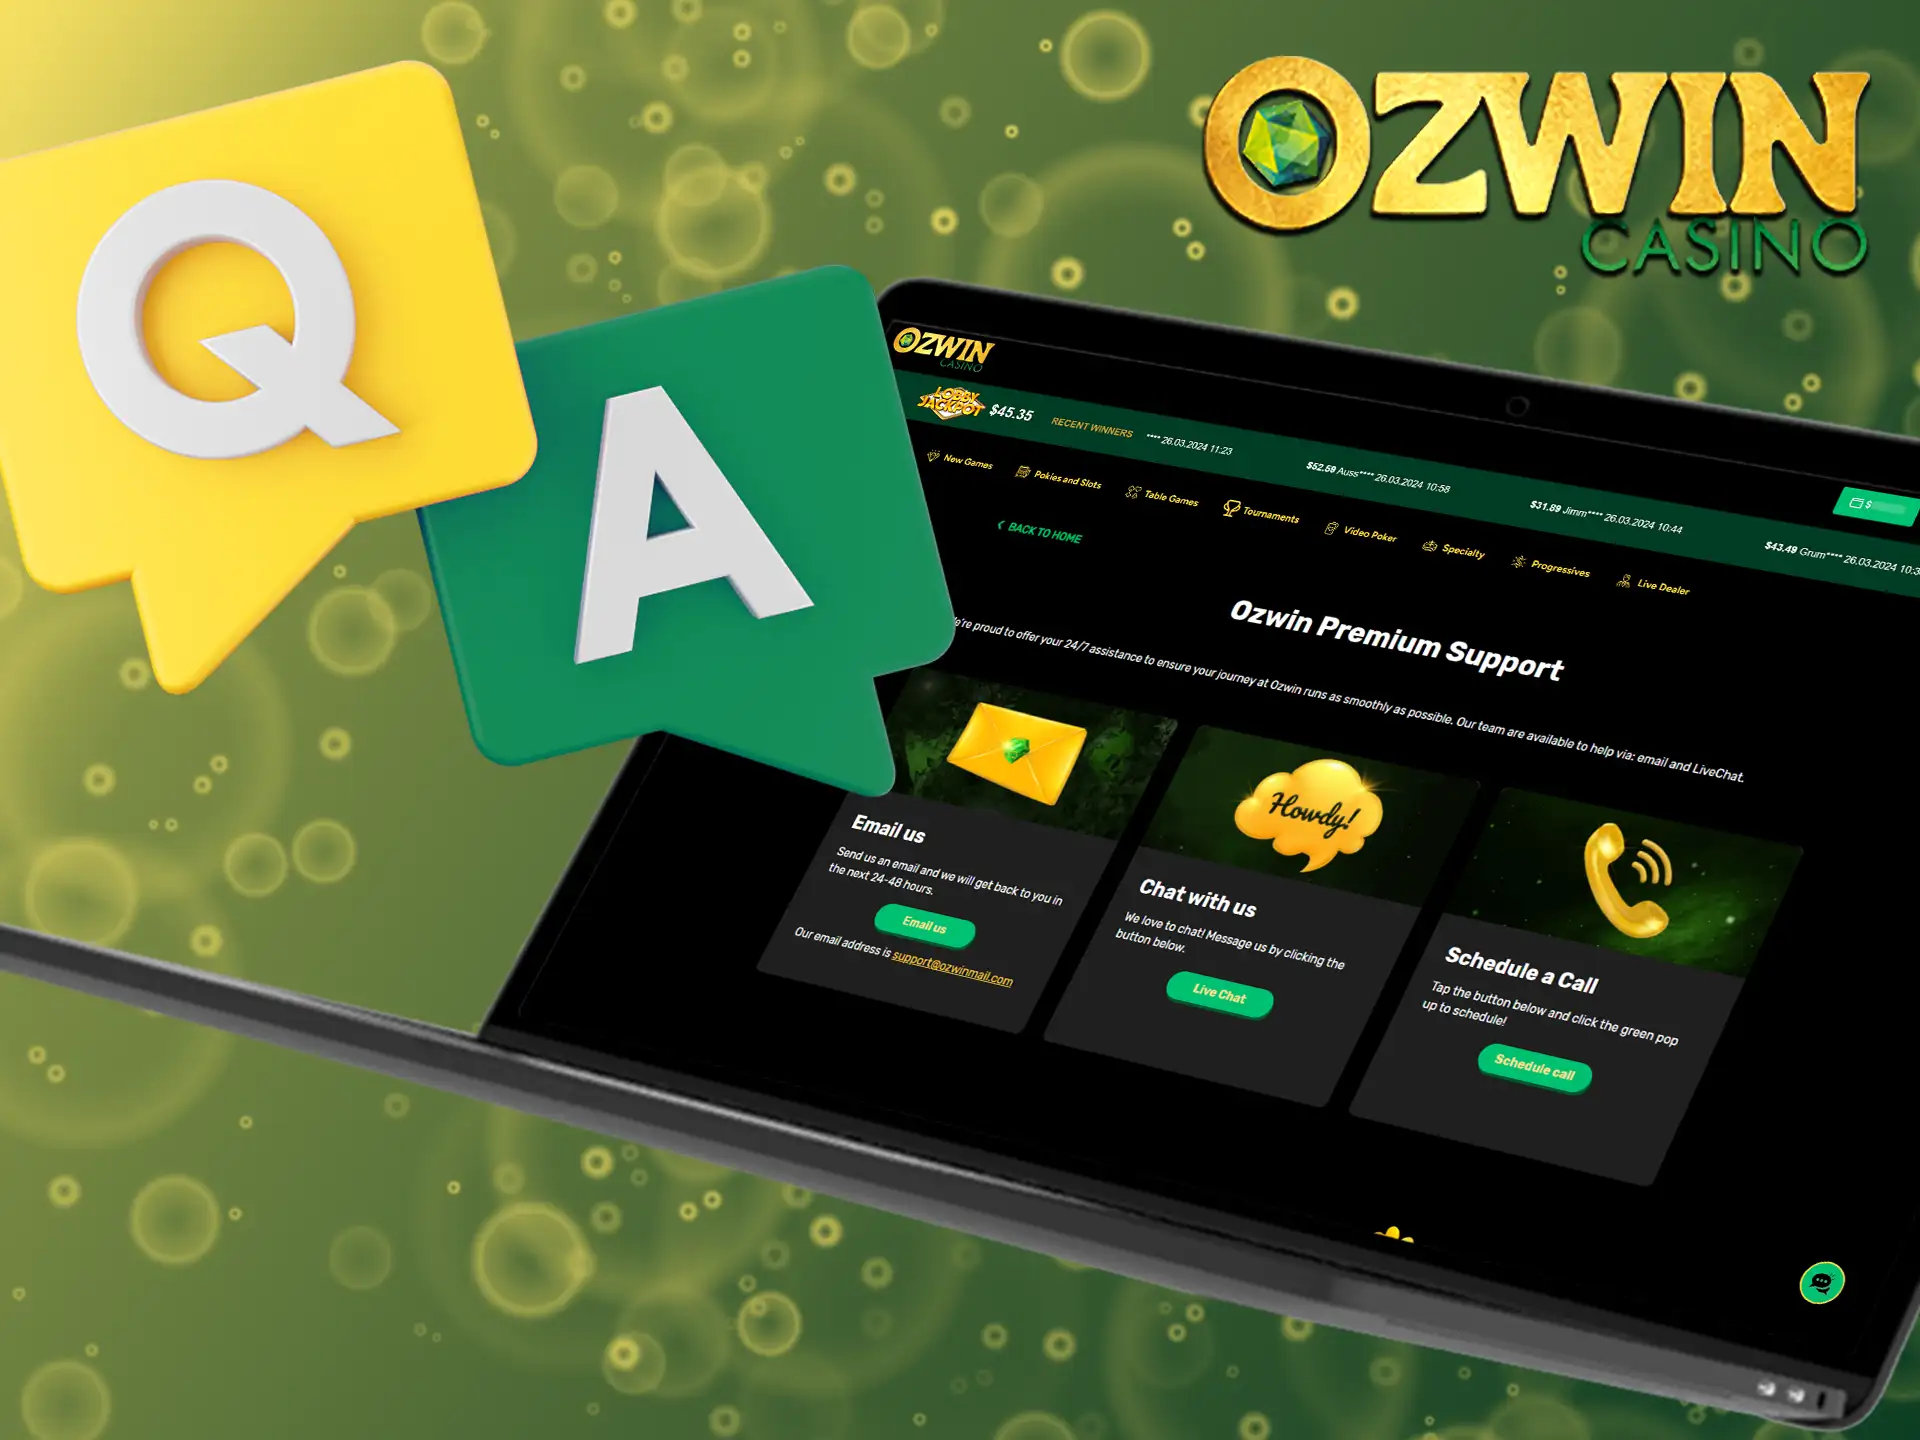 For any questions, Ozwin expert support team is happy to assist you 24/7.